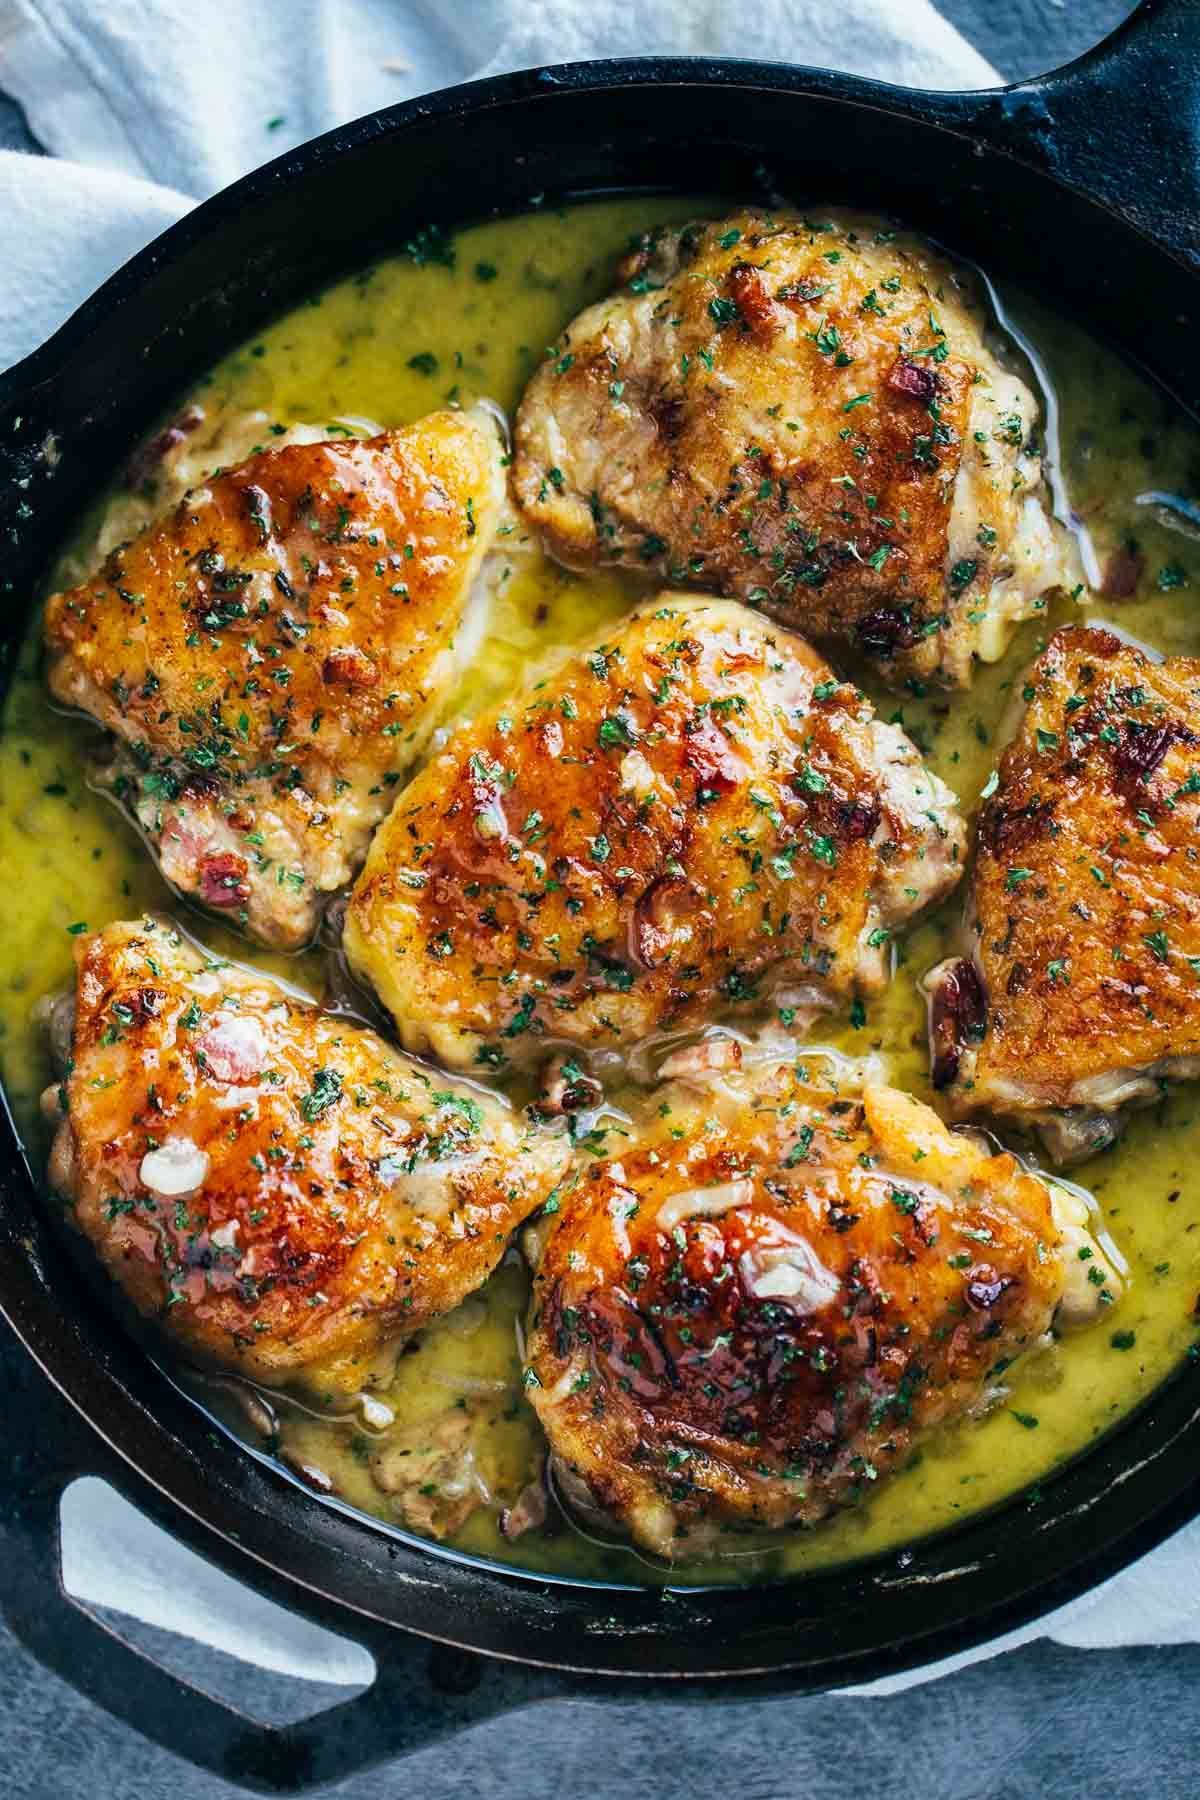 This skillet chicken with bacon and white wine sauce is simple and goes perfectly with any side dish!